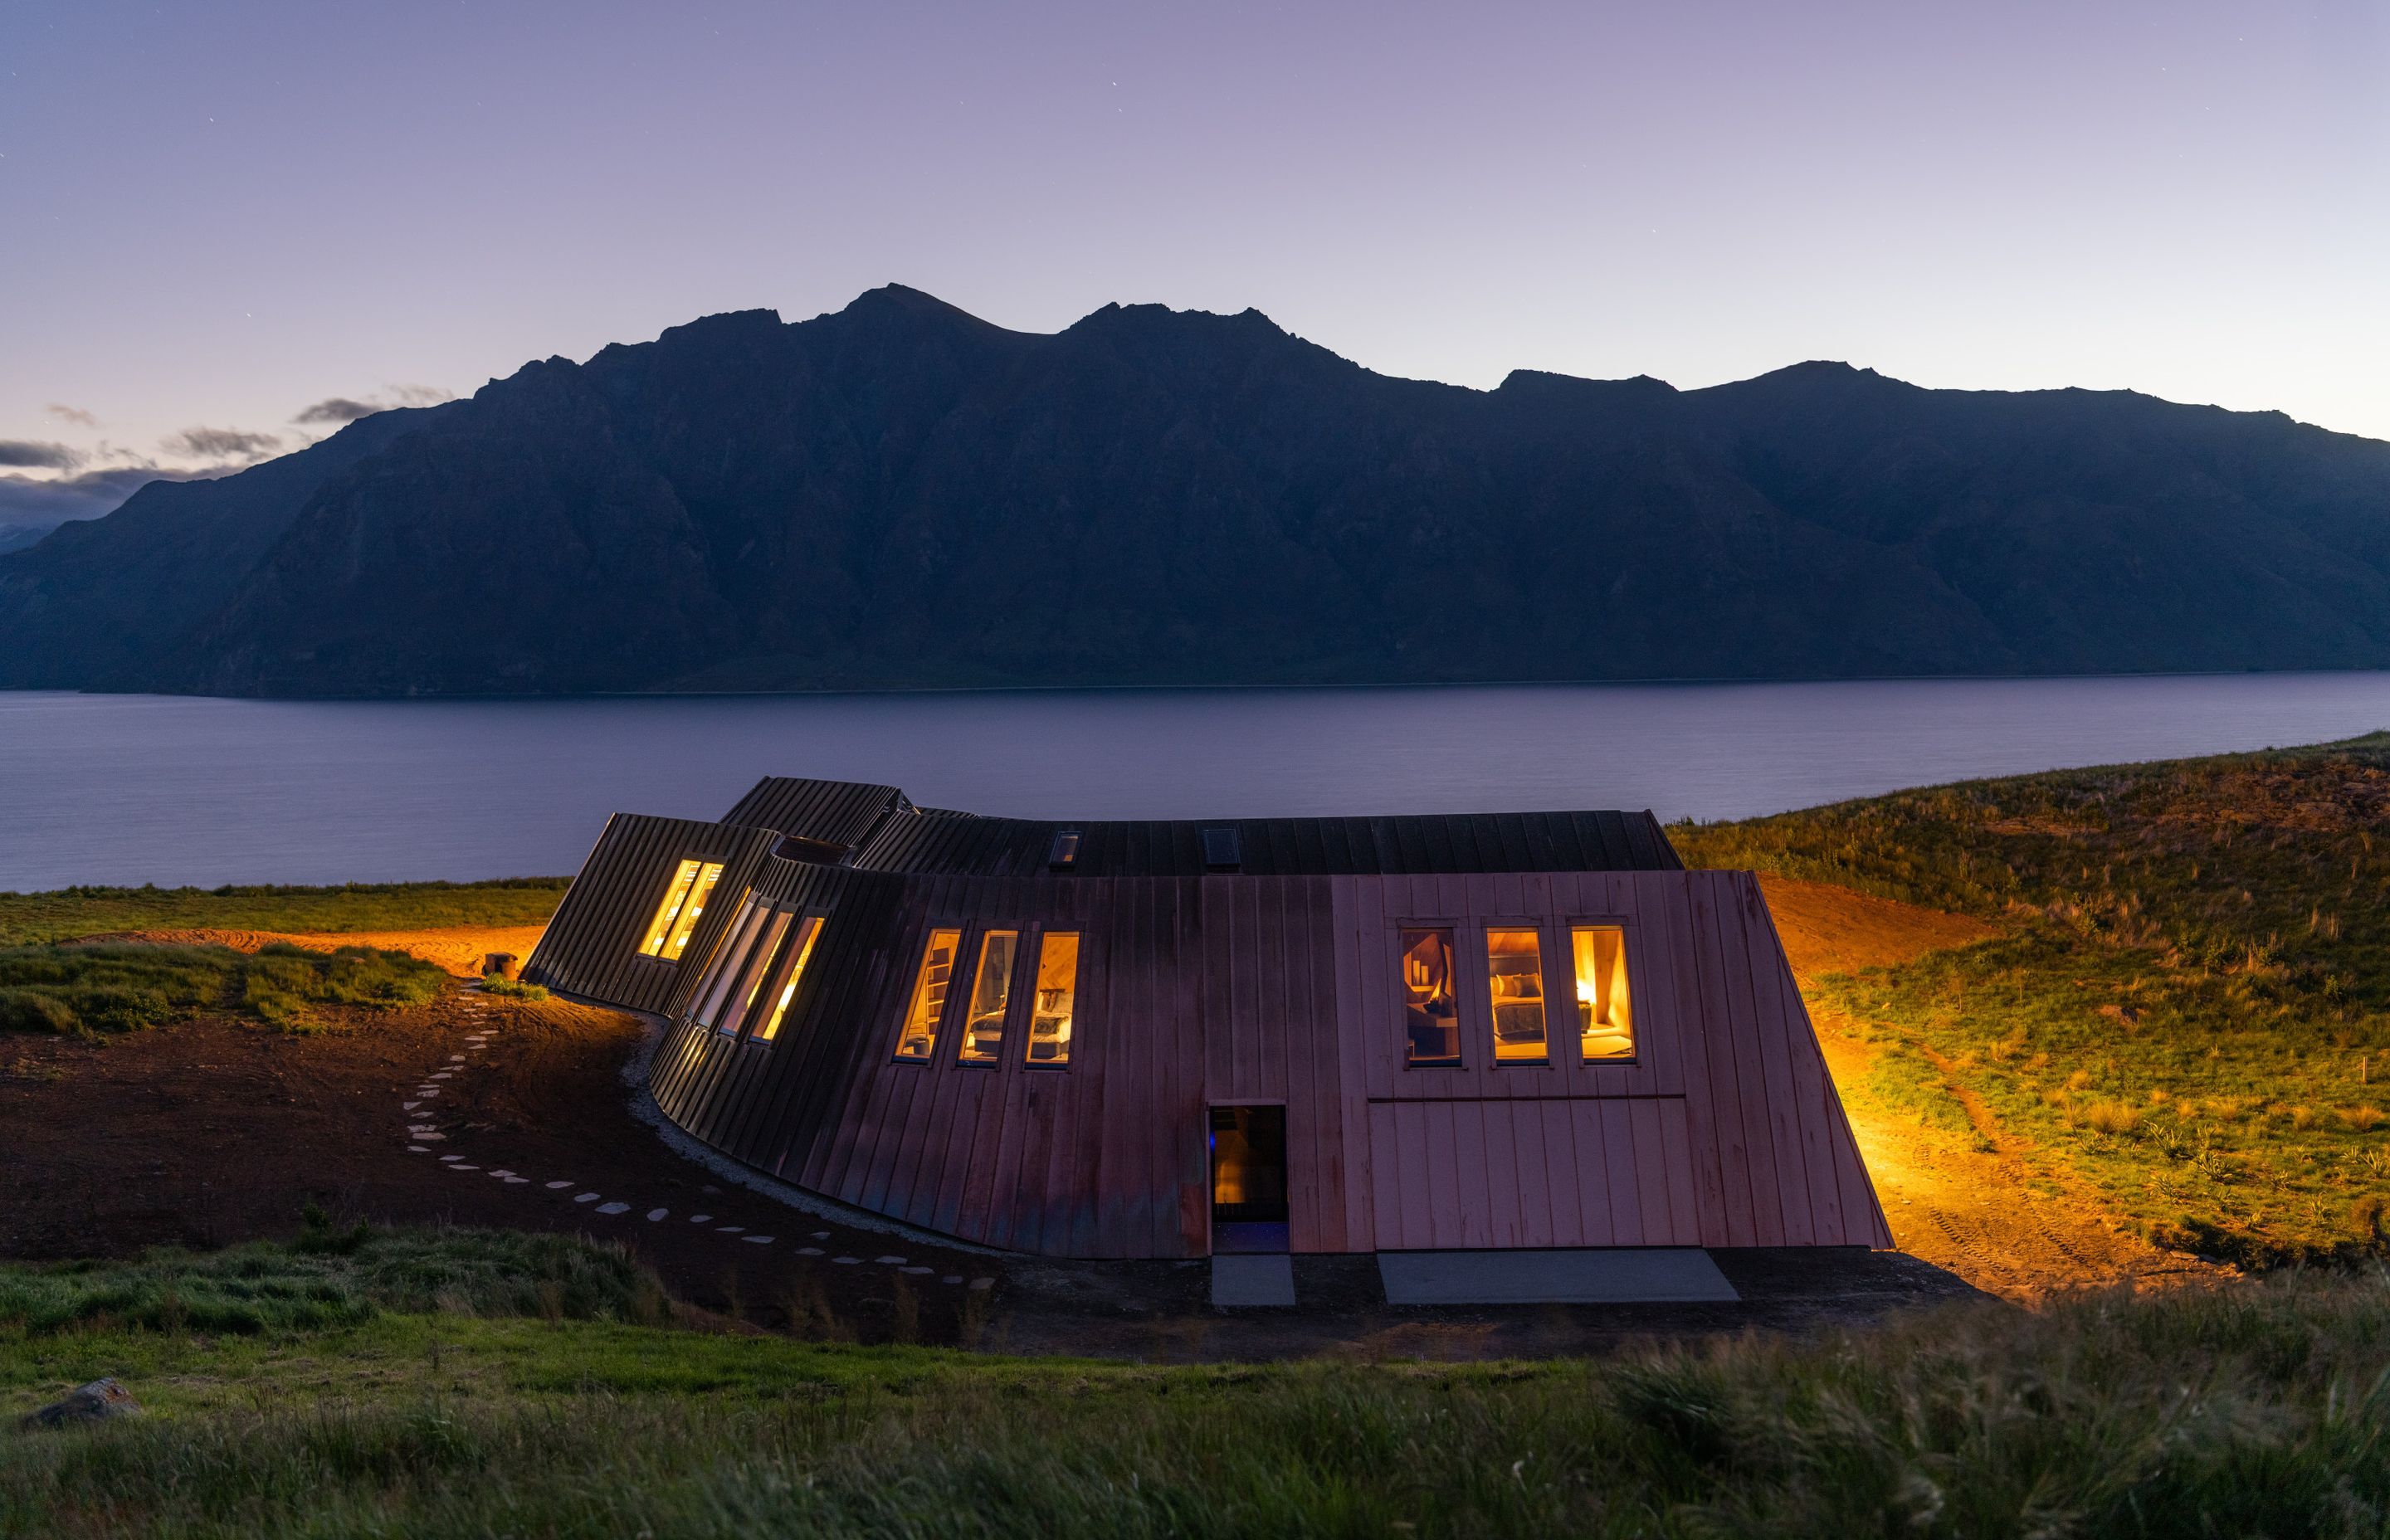 The lodge is situated within a secluded, 1700 sqm elevated site, part of a 7000-acre station, overlooking Lake Hawea.